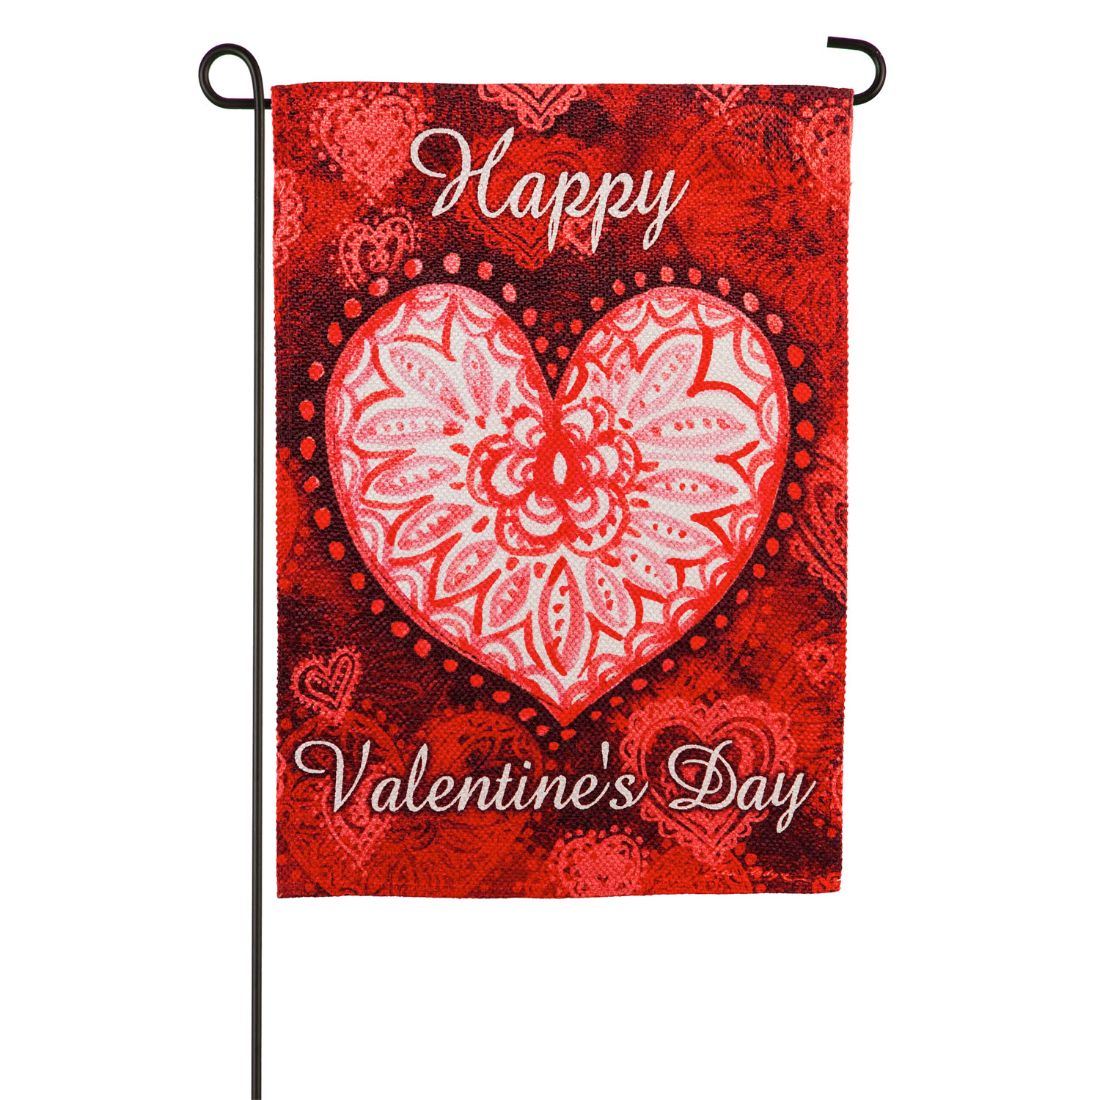 All You Need is Love Garden Textured Suede Flag